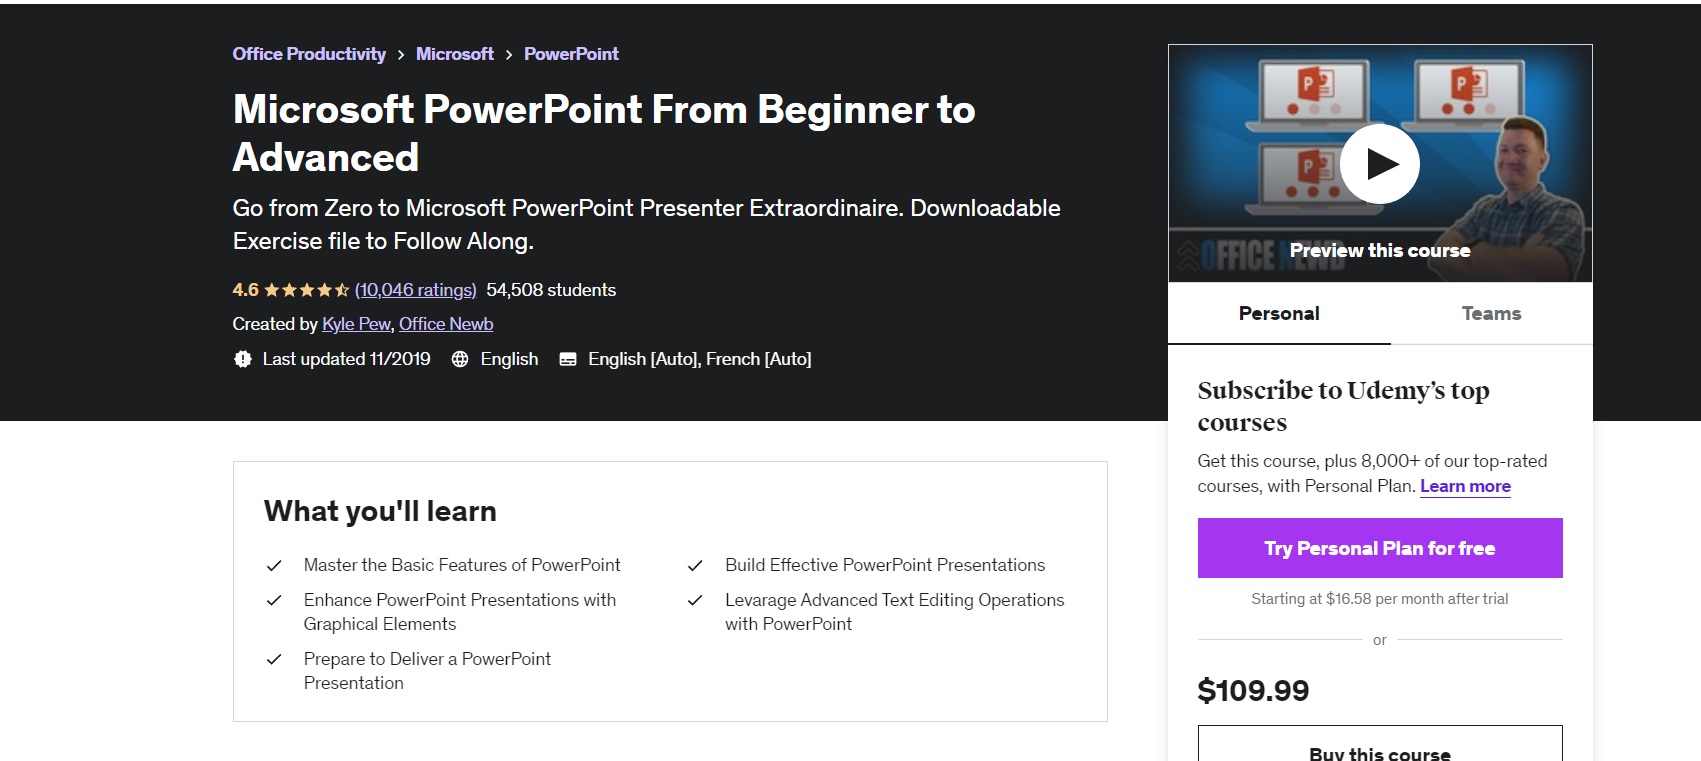 Microsoft PowerPoint For Beginner To Advanced